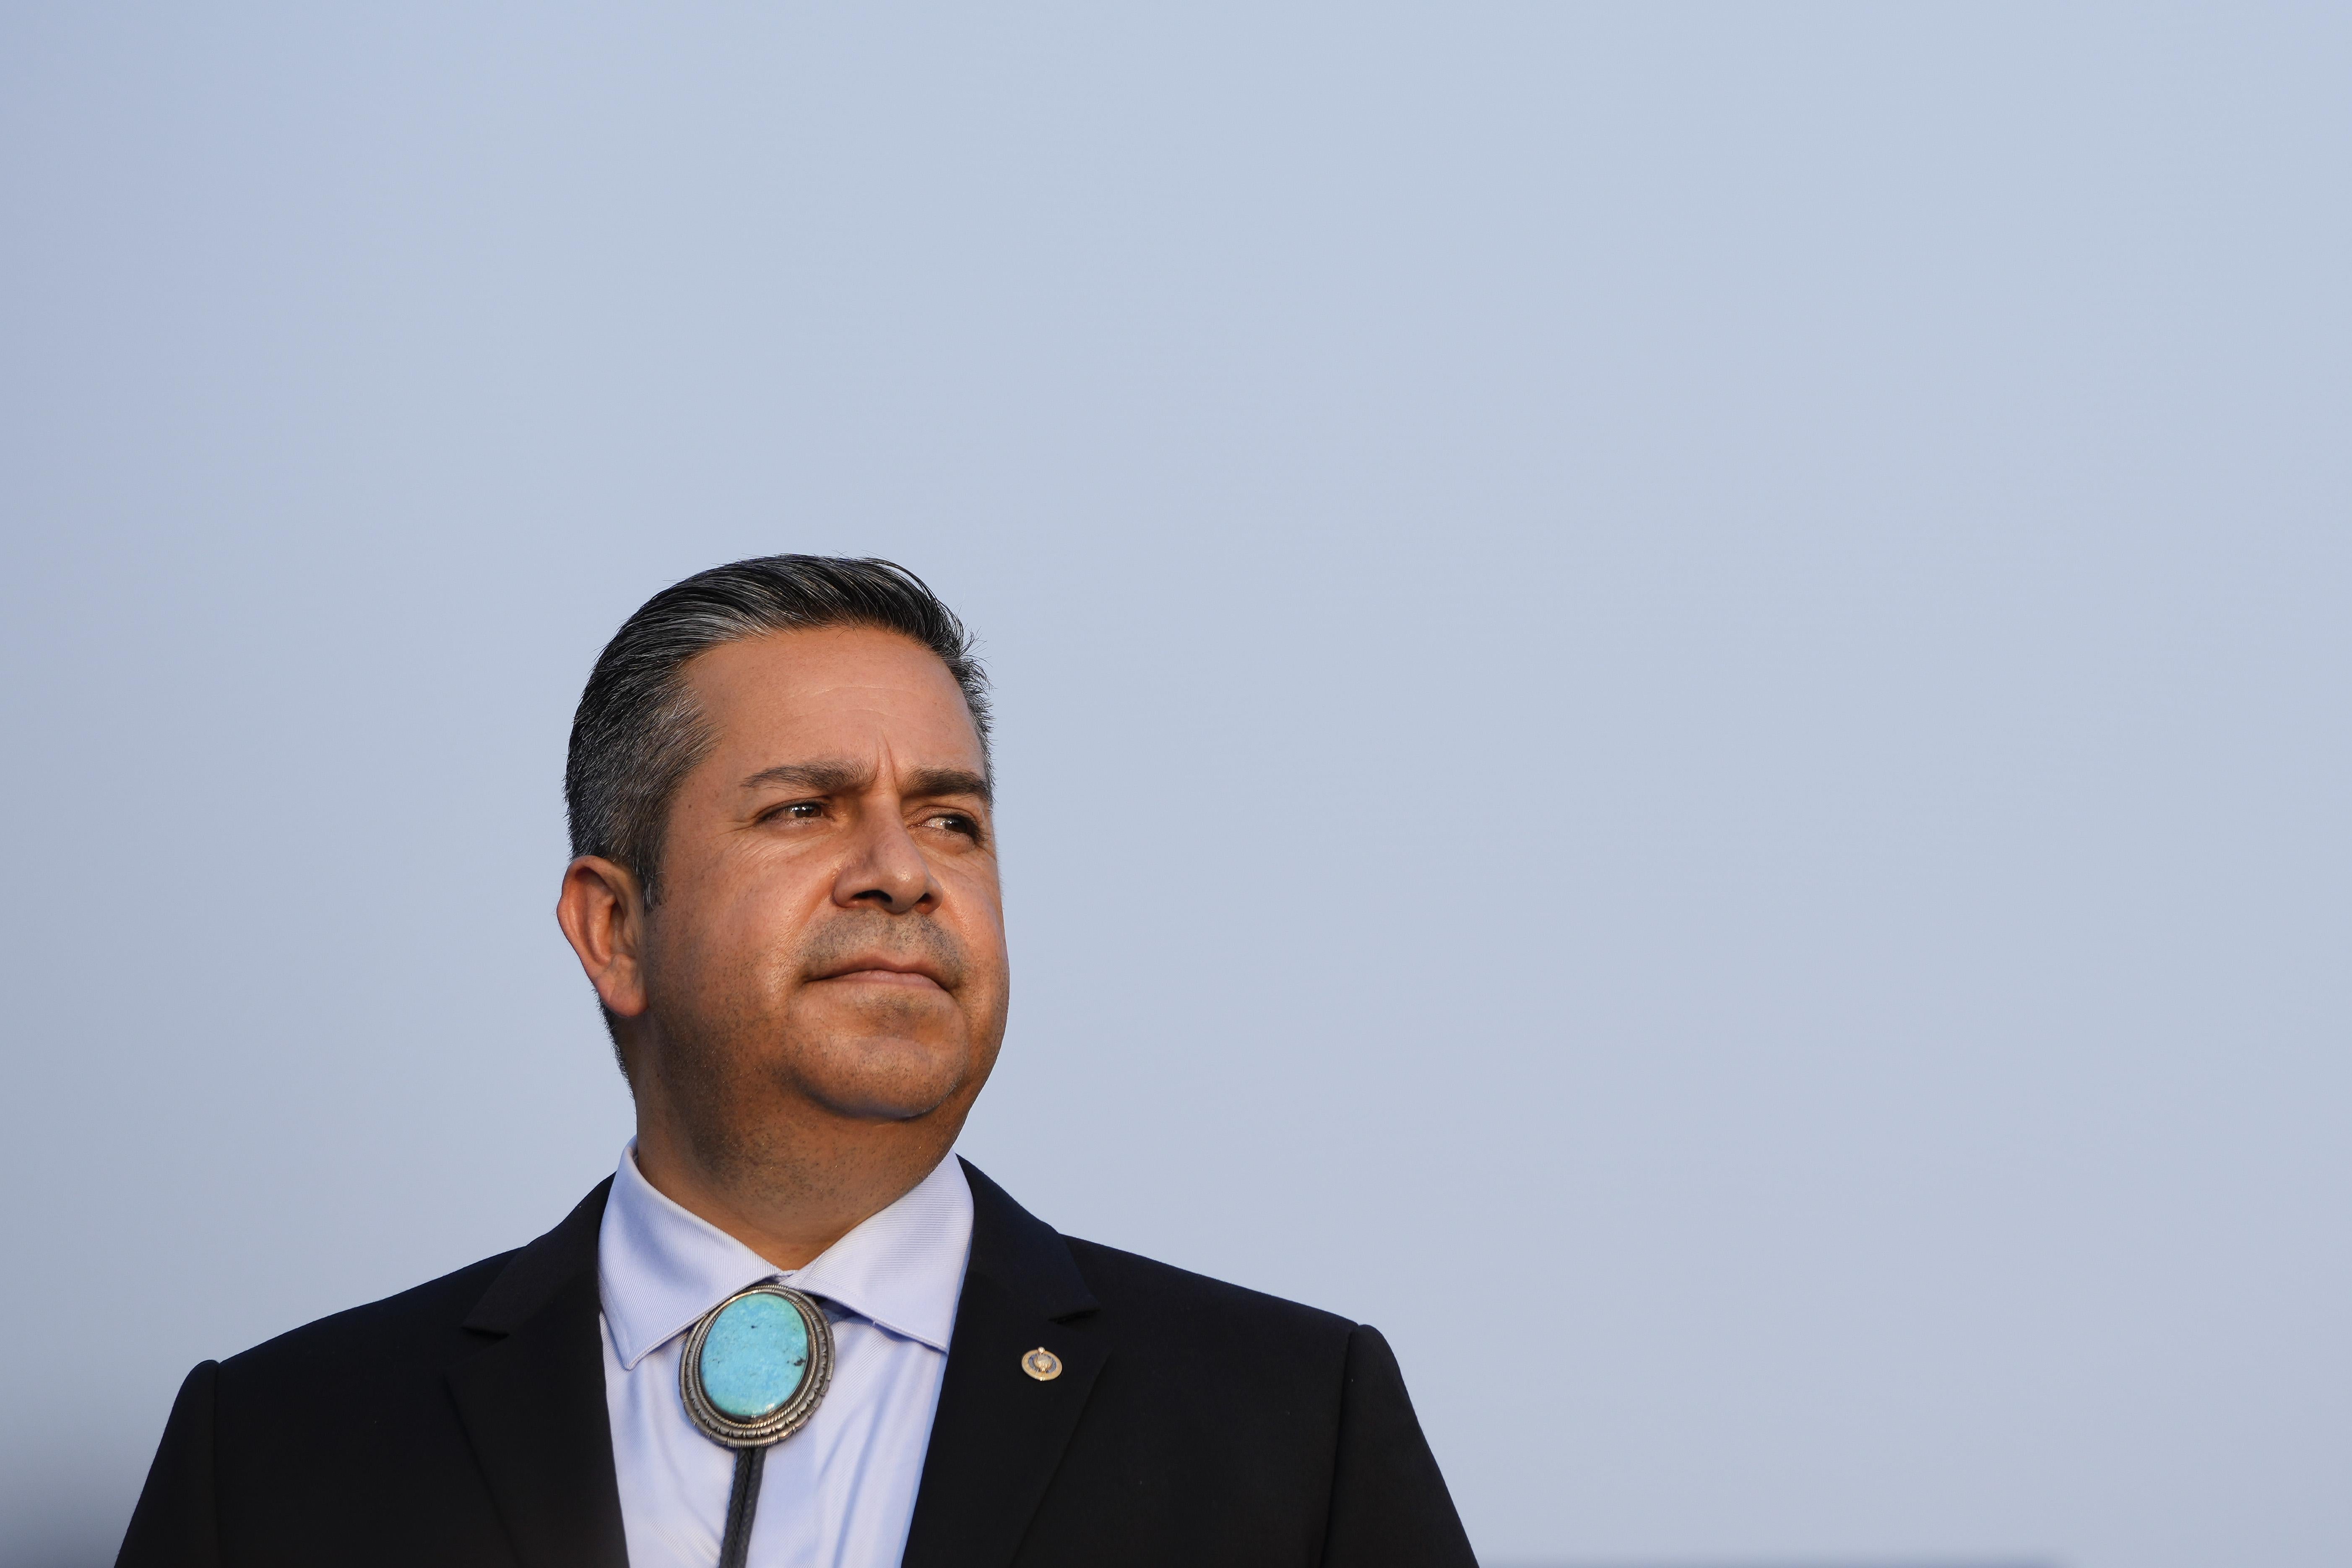 A photo of the senator Ben Ray Lujan from New Mexico.